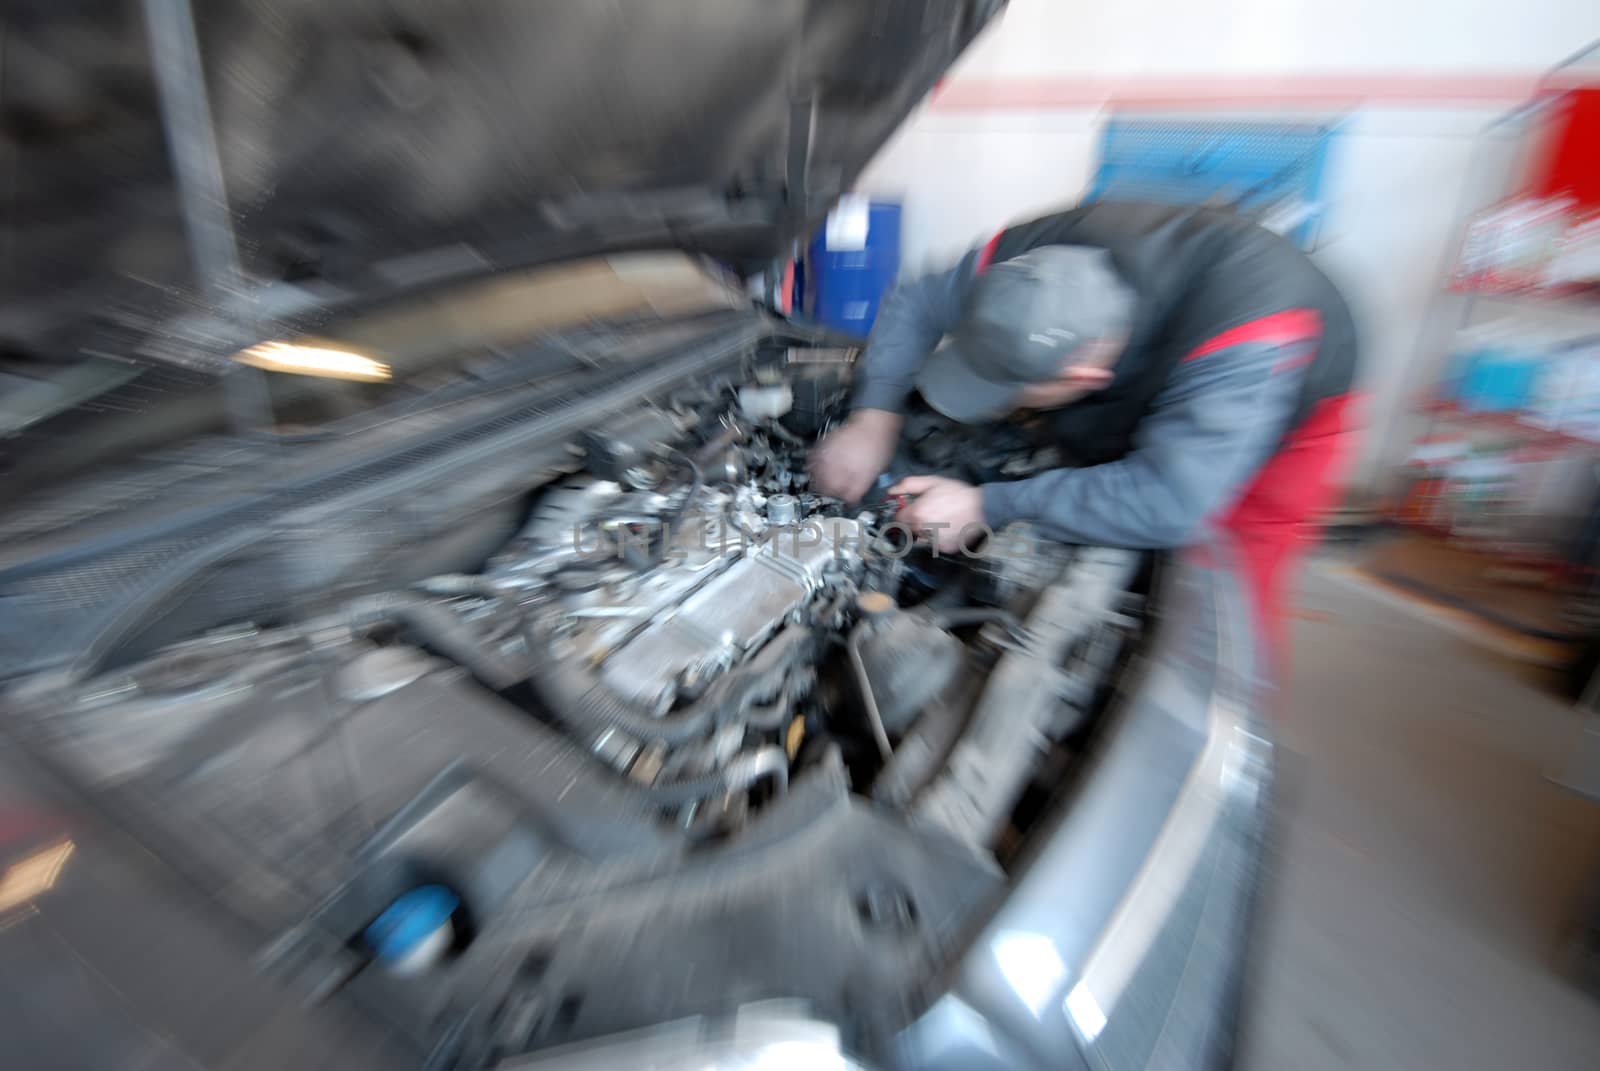 An auto mechanic works on an engine of an automobile in an auto repair shop